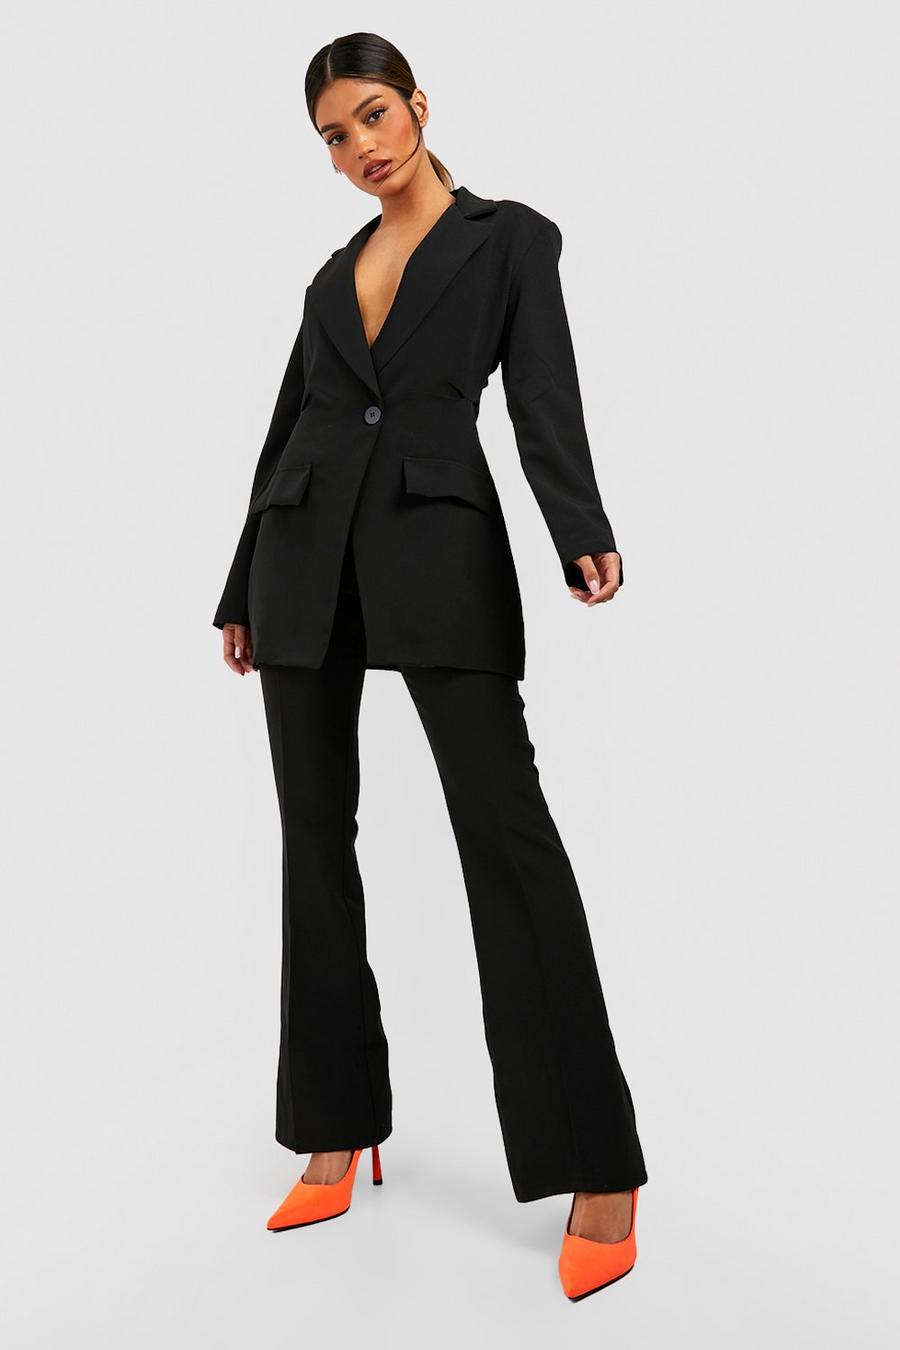 Black Fit & Flare Seam Front Tailored Pants